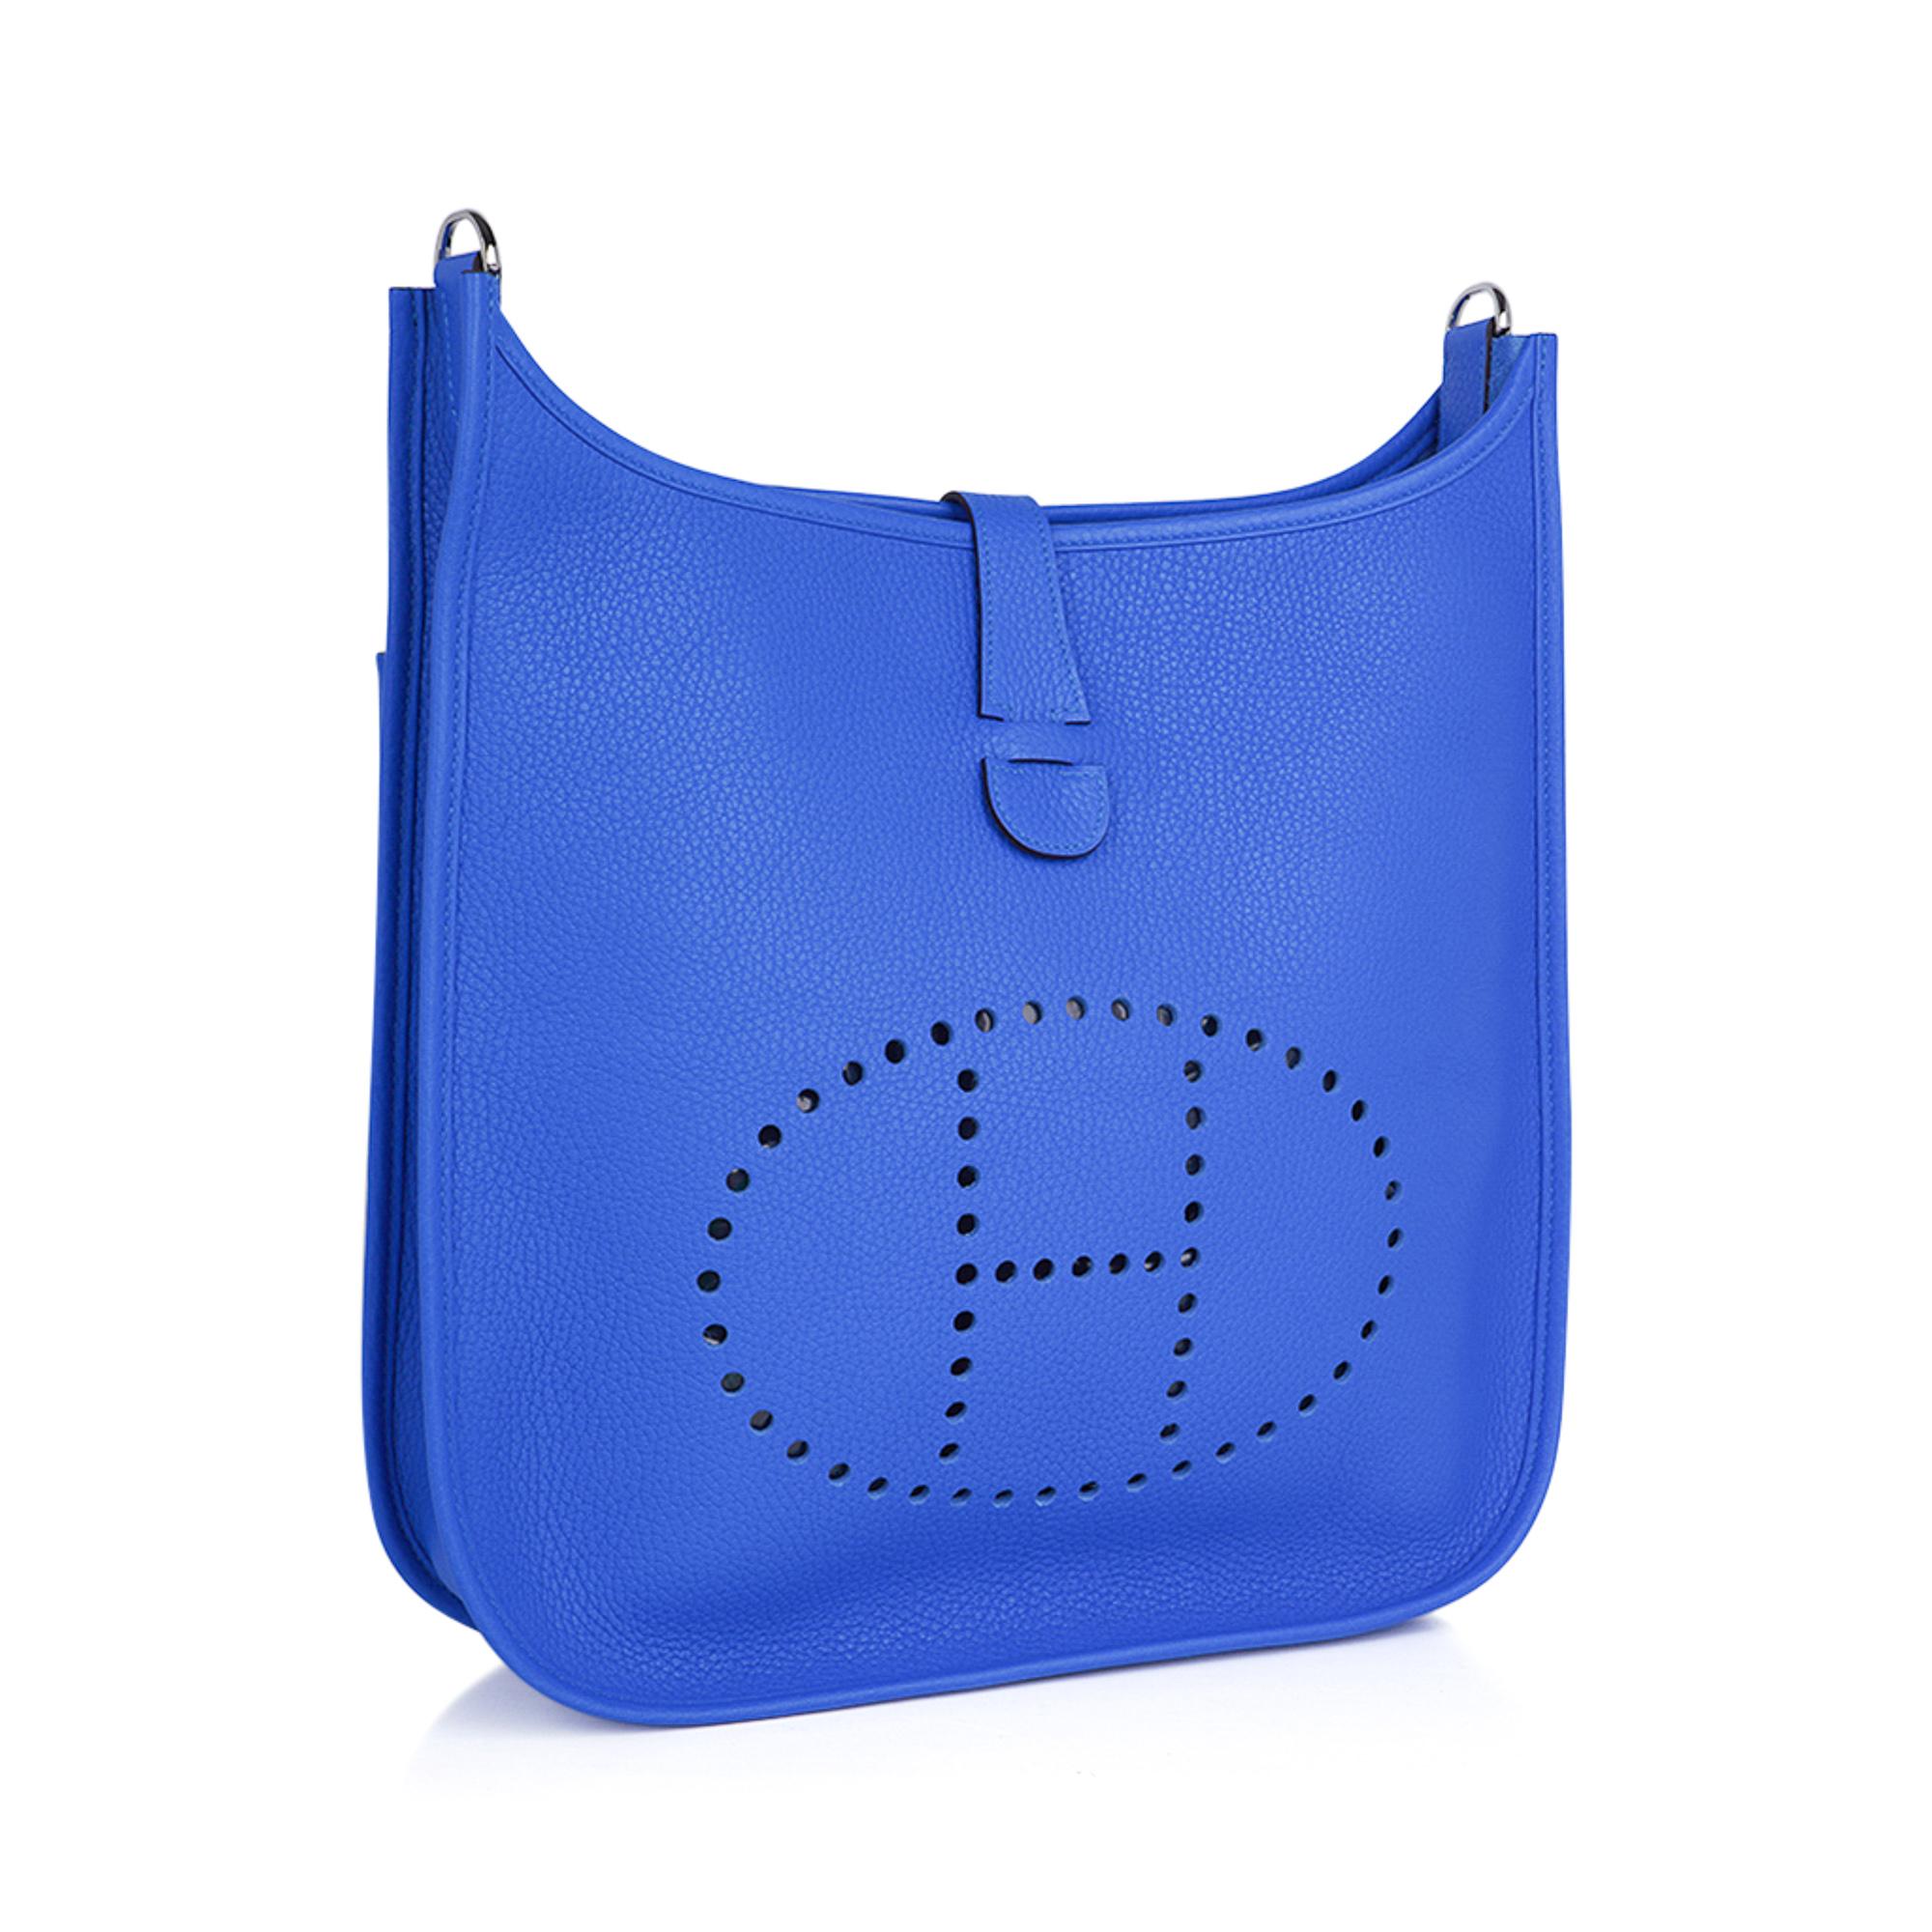 Mightychic offers an Hermes Evelyne GM featured in vibrant Bleu Hydra.
Bright and bold this splash of colour is a perfect accent to any wardrobe.
Fresh with Palladium hardware and Clemence leather.
Fabulous shoulder or cross body bag with roomy